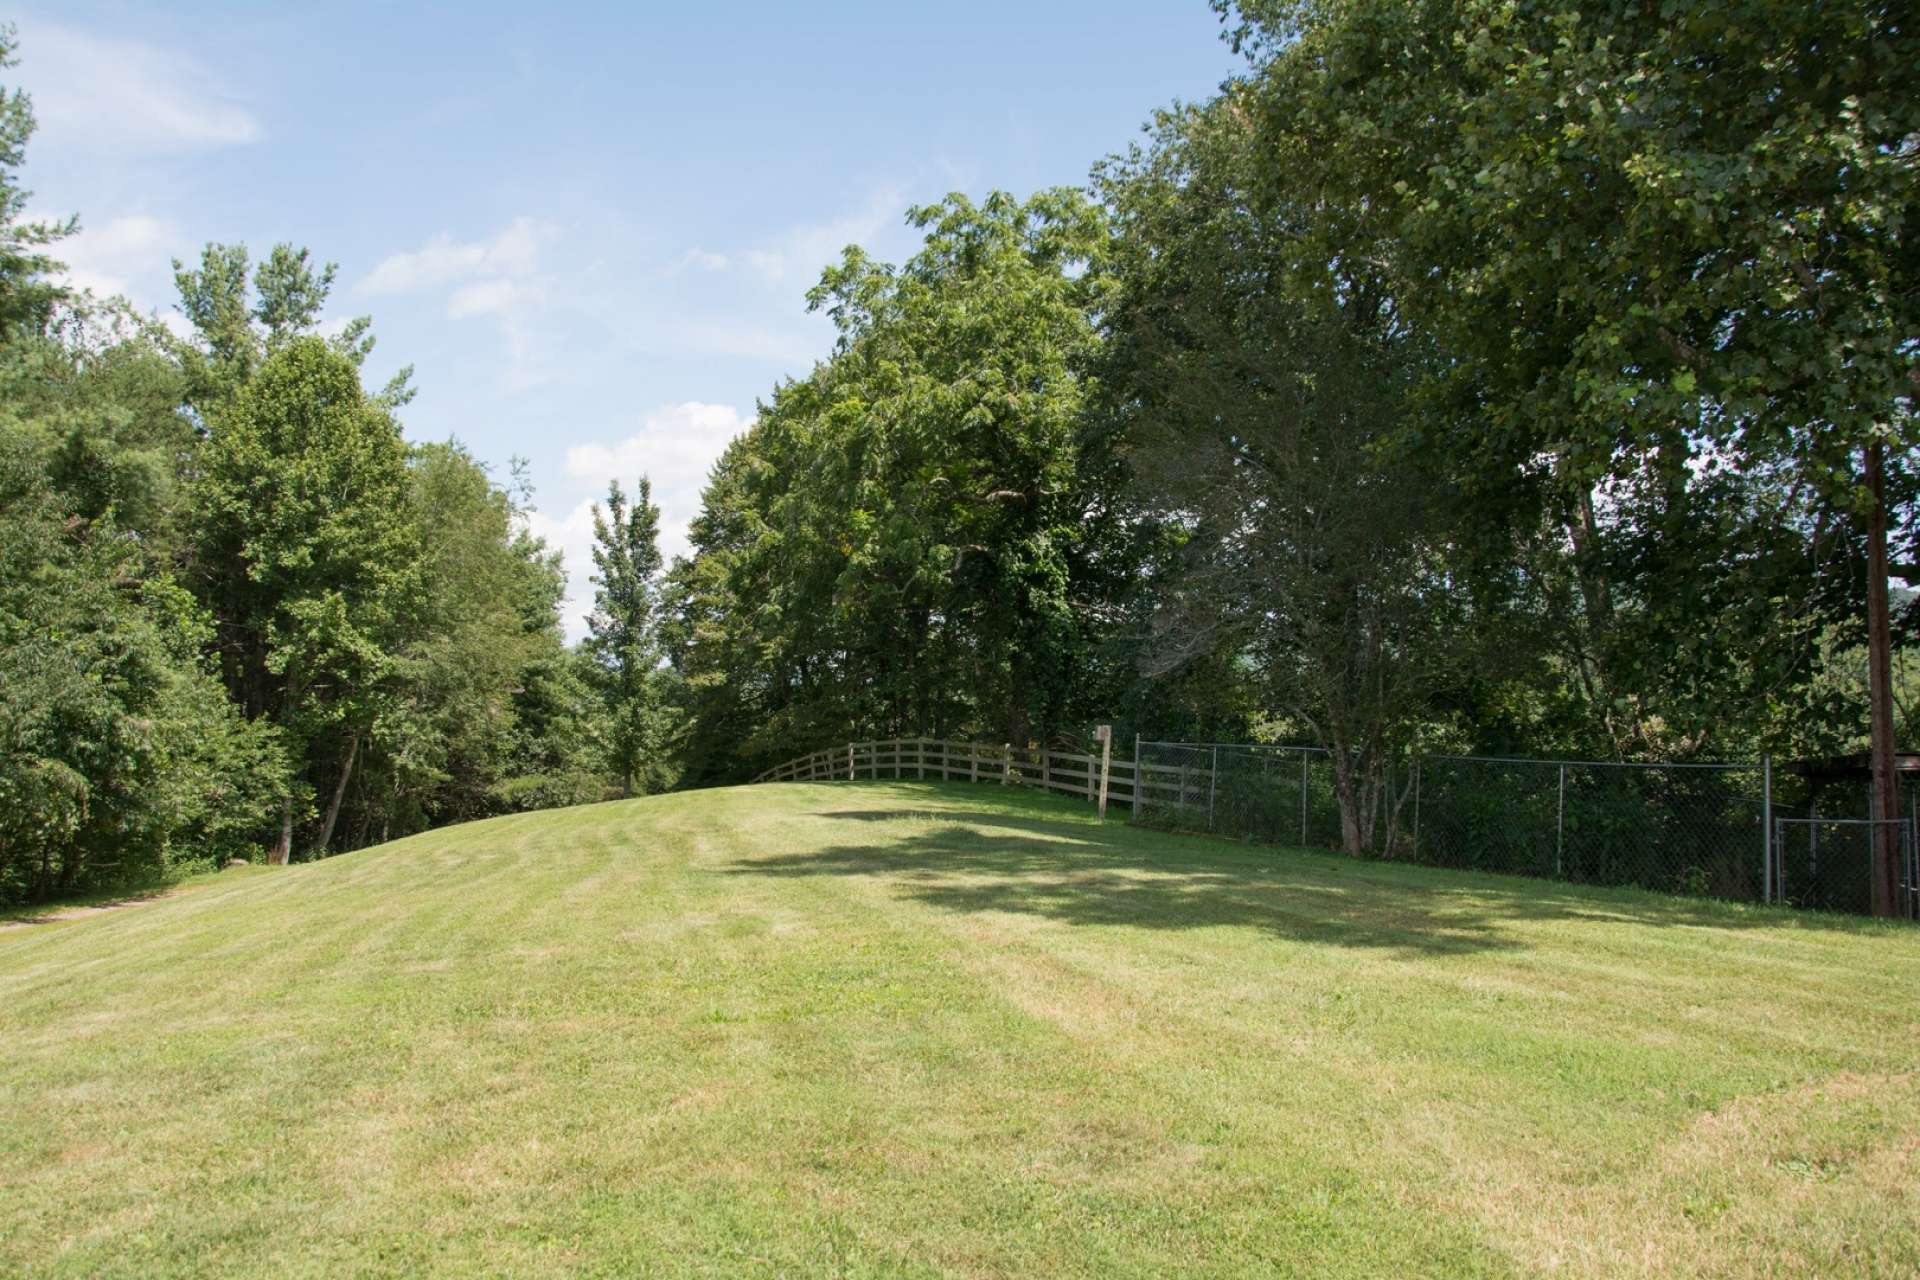 The 35+ acre setting offers lots of green space for crops, gardens, play, or livestock. Serene woodlands, with a diverse mixture of native hardwoods, evergreens and beautiful mountain foliage, offer plenty of exploration and/or hunting opportunities.